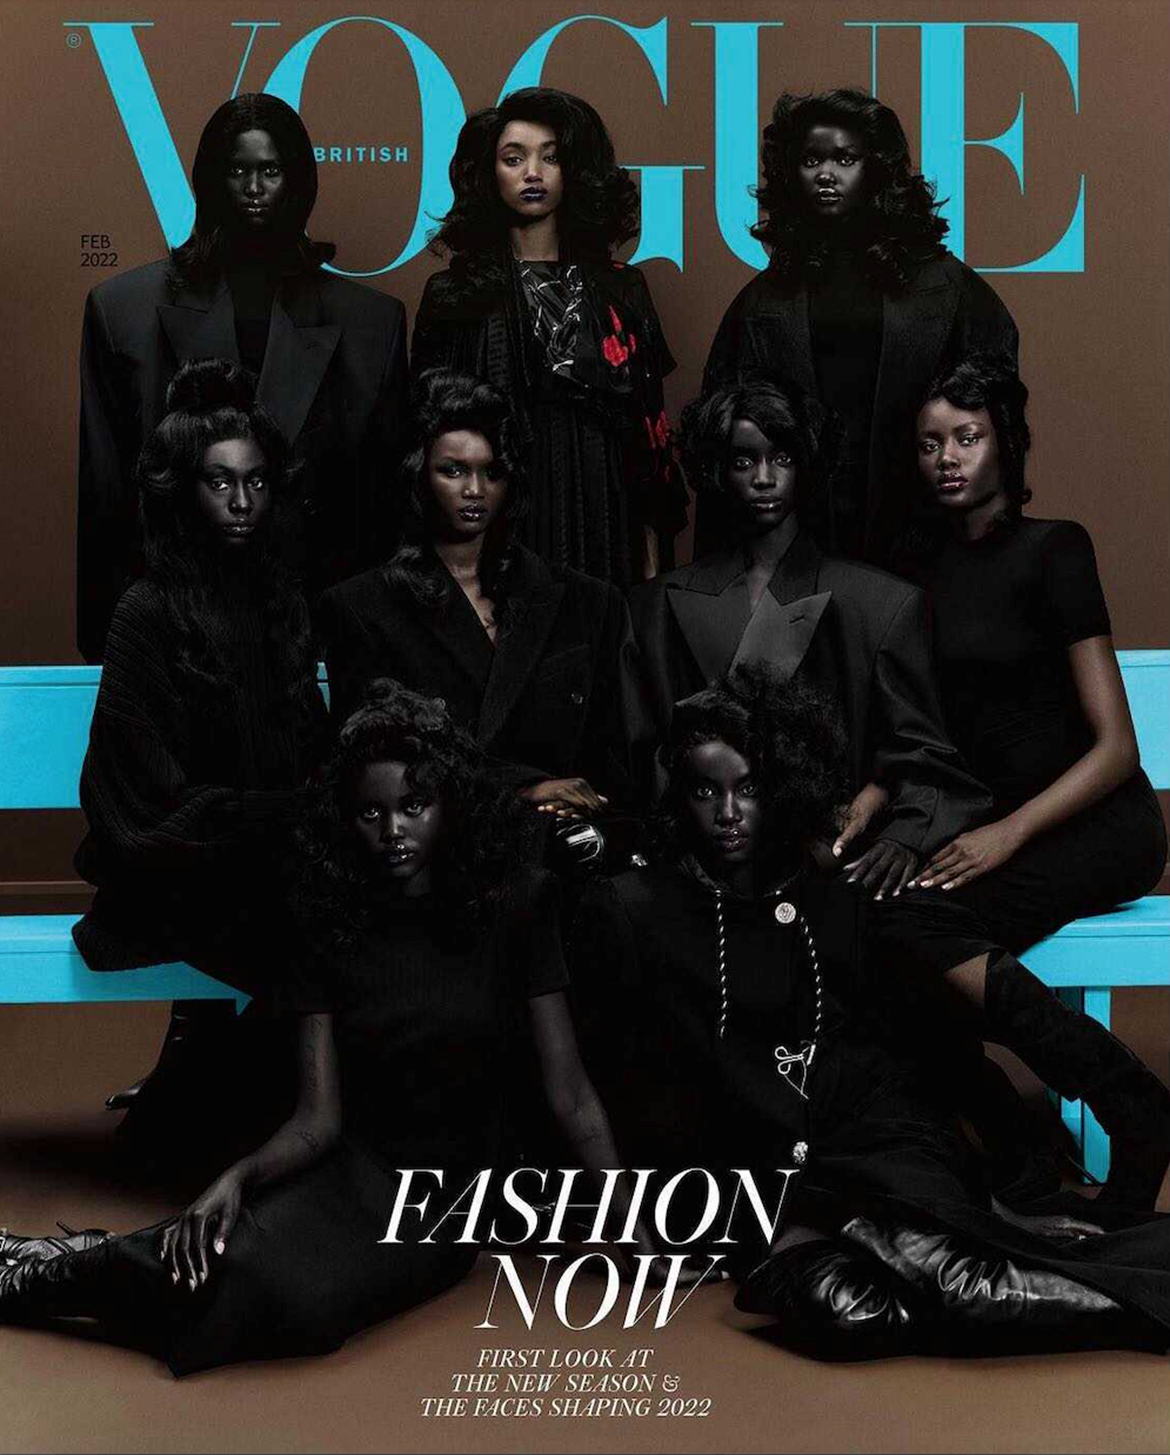 British Vogue continues to push boundaries with their February cover